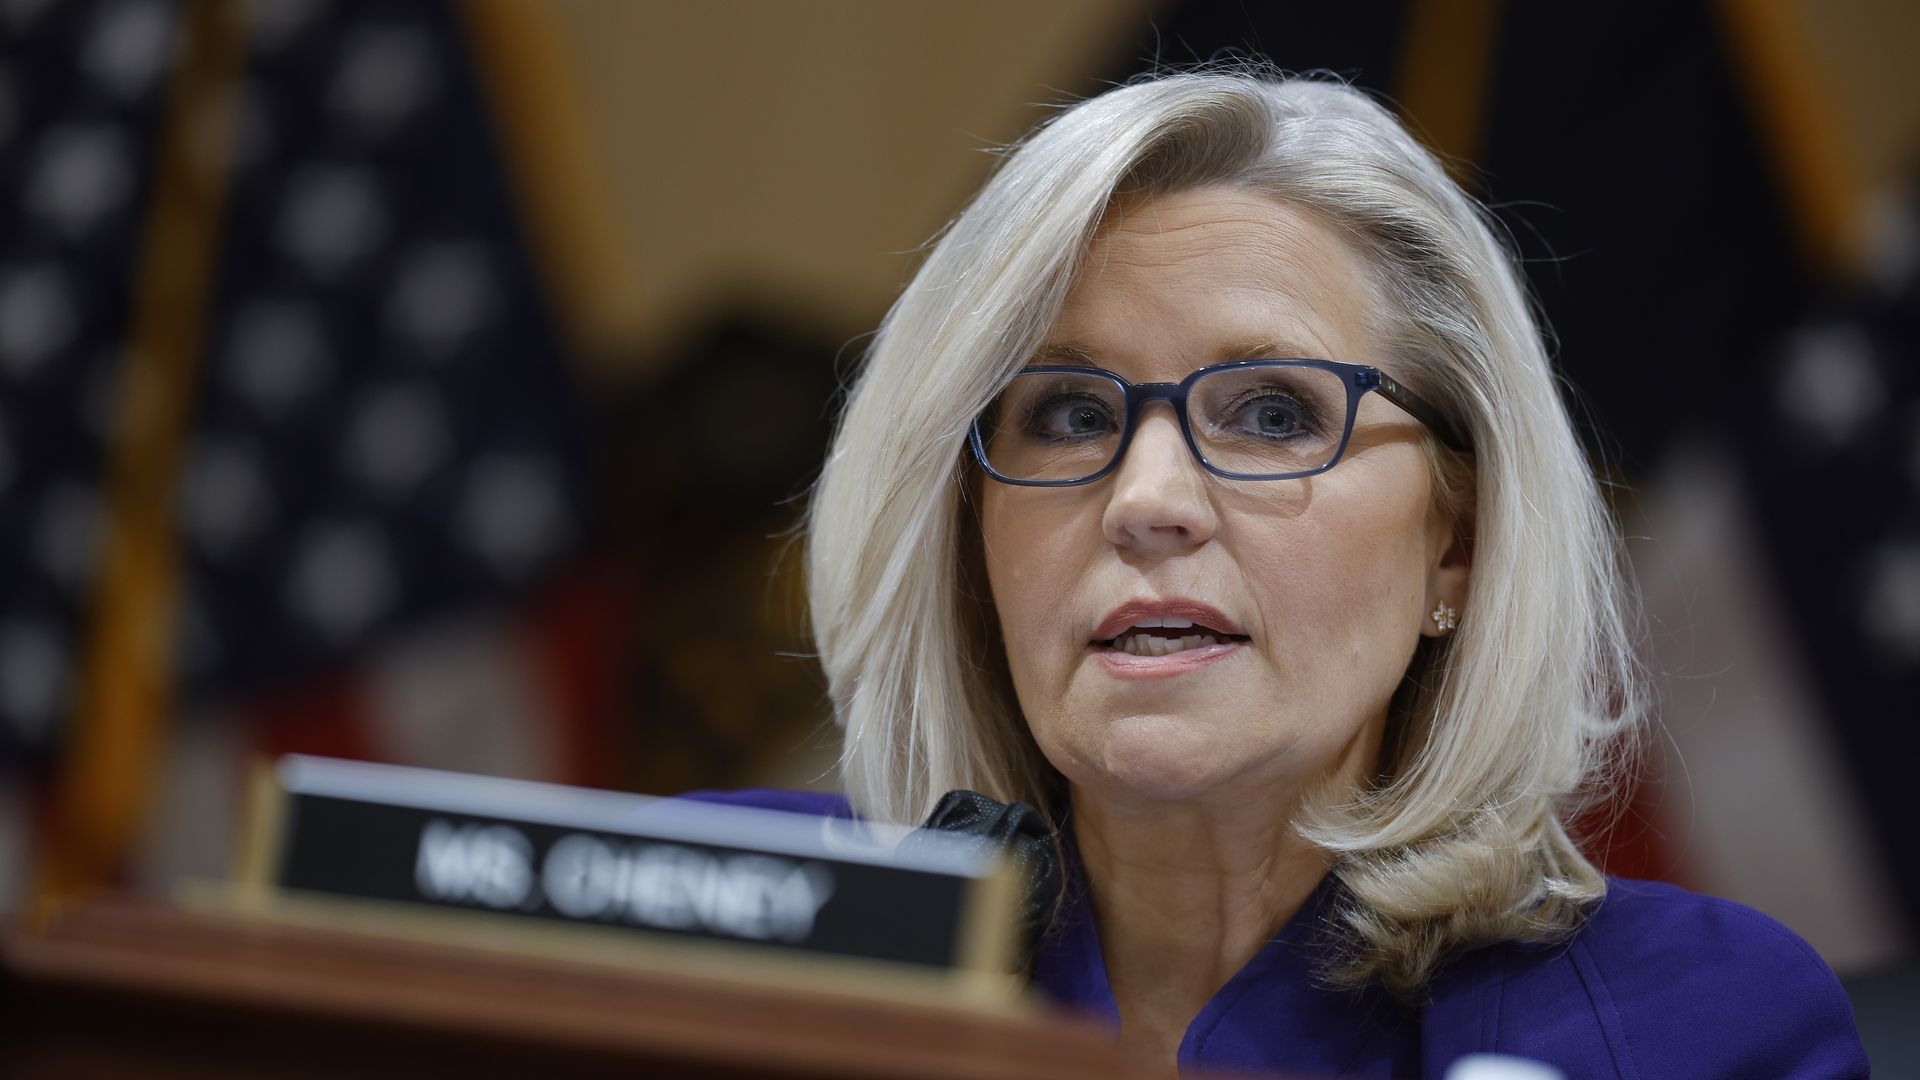 U.S. Rep. Liz Cheney (R-WY), Vice Chairwoman of the Select Committee to Investigate the January 6th Attack on the U.S. Capitol, delivers remarks during the last public meeting in the Canon House Office Building on Capitol Hill on December 19, 2022 in Washington, DC. 